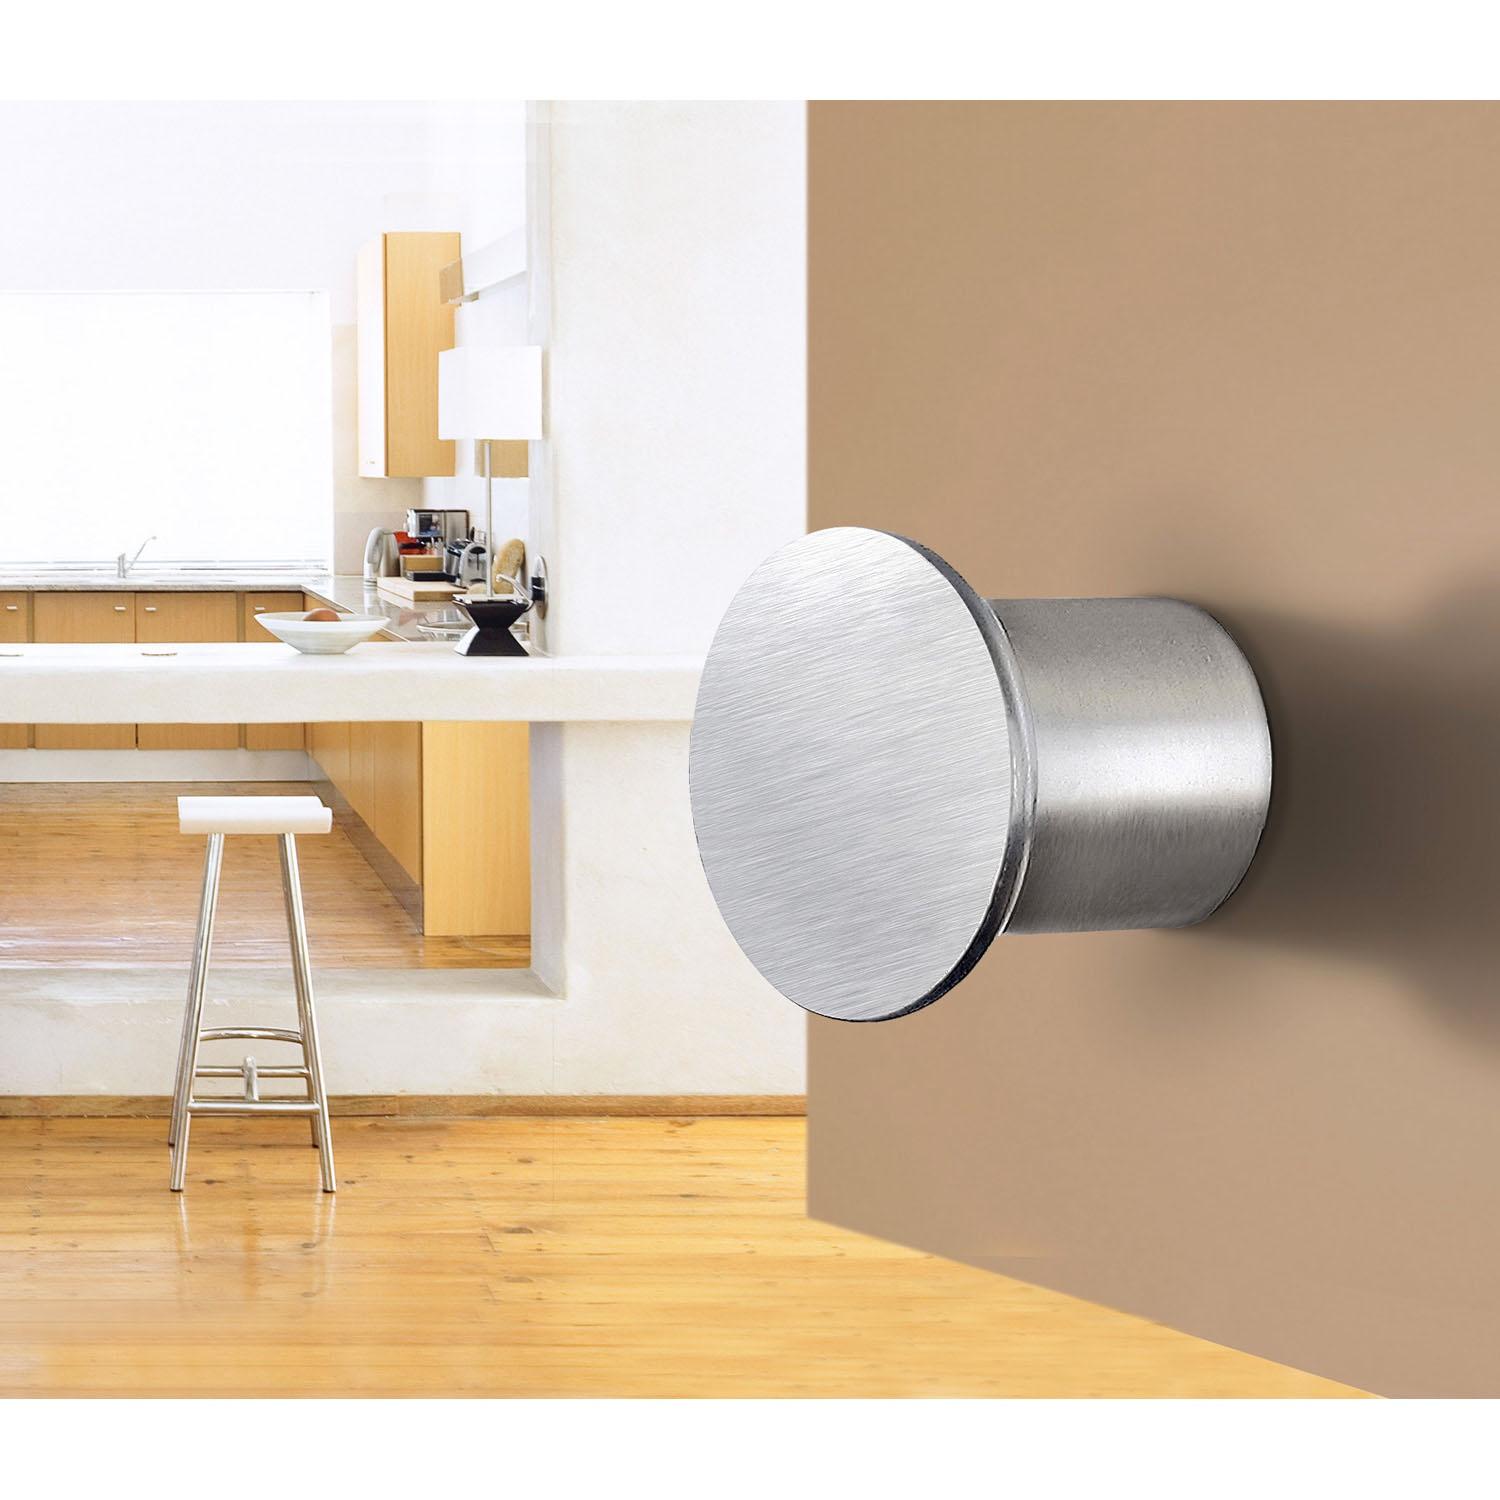 brushed stainless steel knob